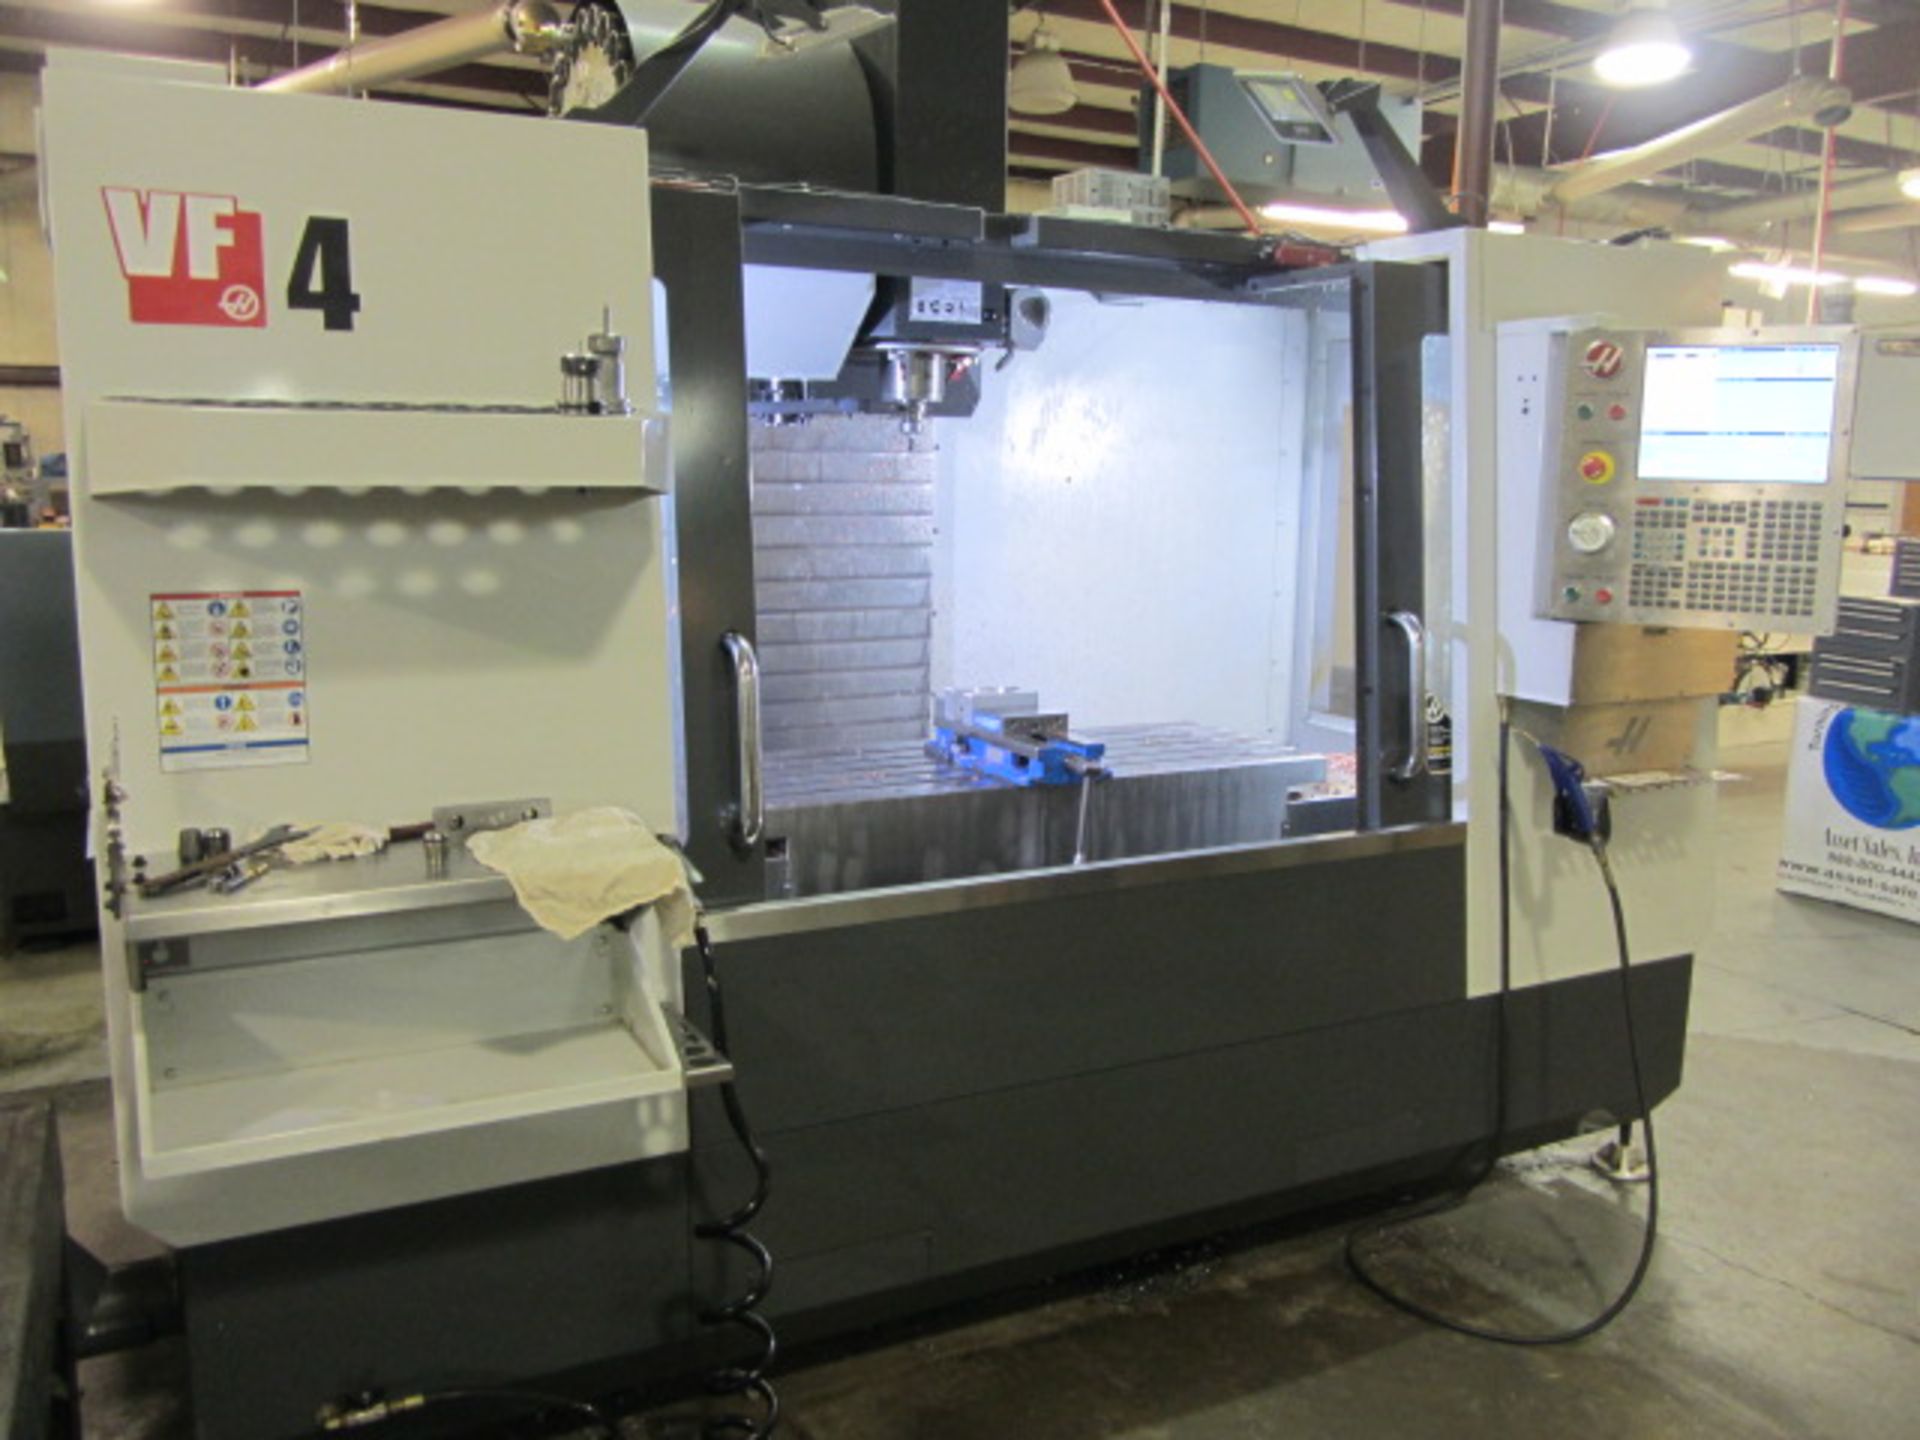 Haas VF-4 CNC Vertical Machining Center with 52'' x 20'' Table, #40 Taper Spindle Speeds to 8100 - Image 7 of 8